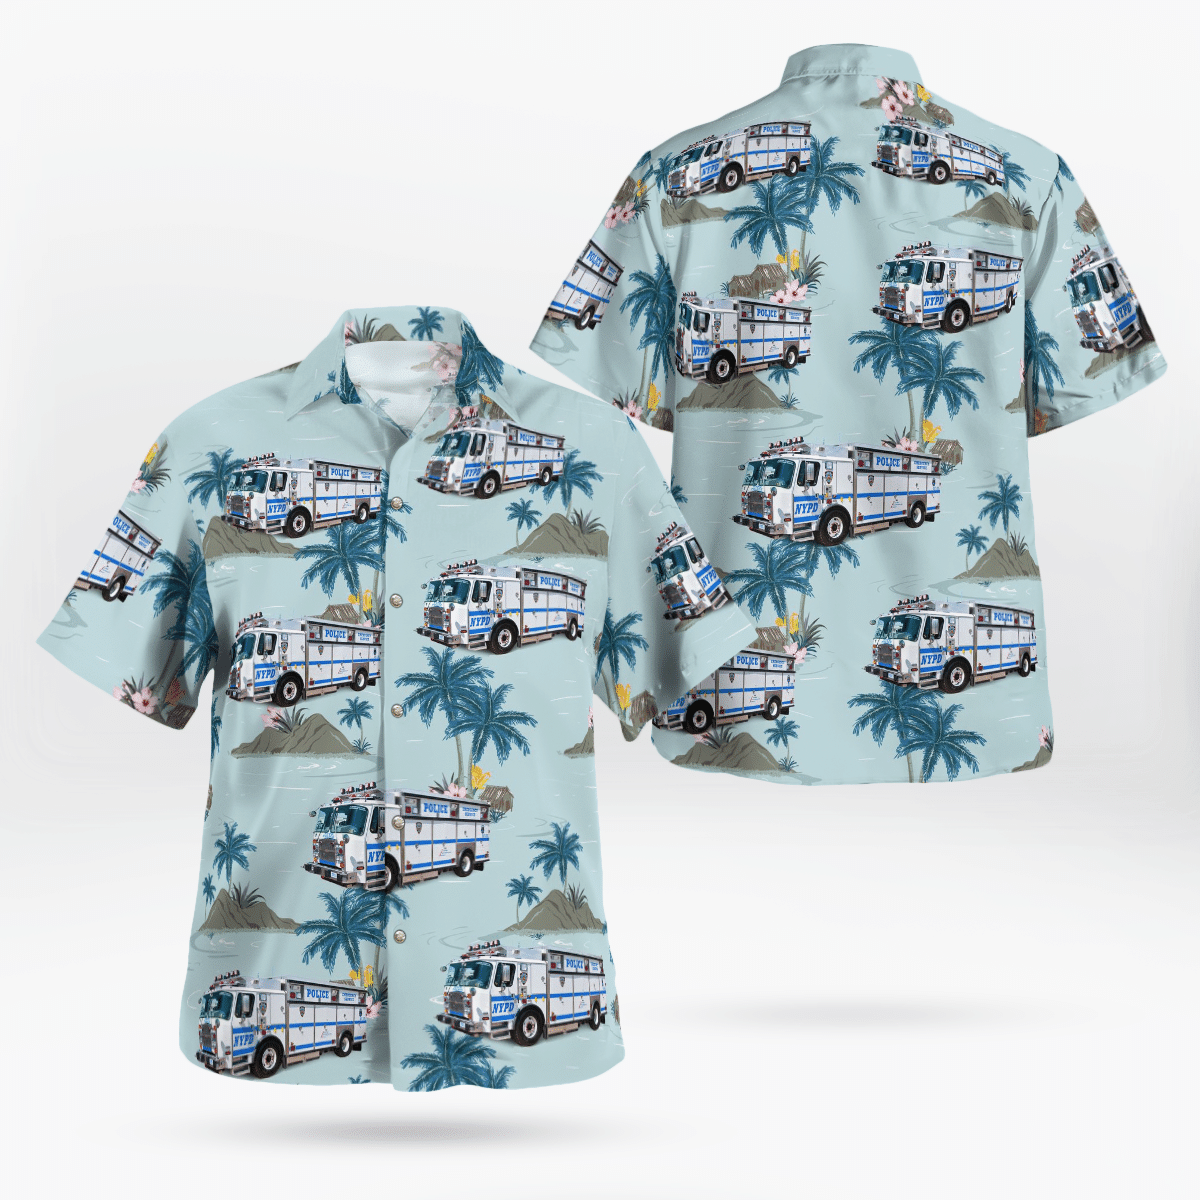 HOT New York City Police Department Emergency Service Unit Tropical Shirt2